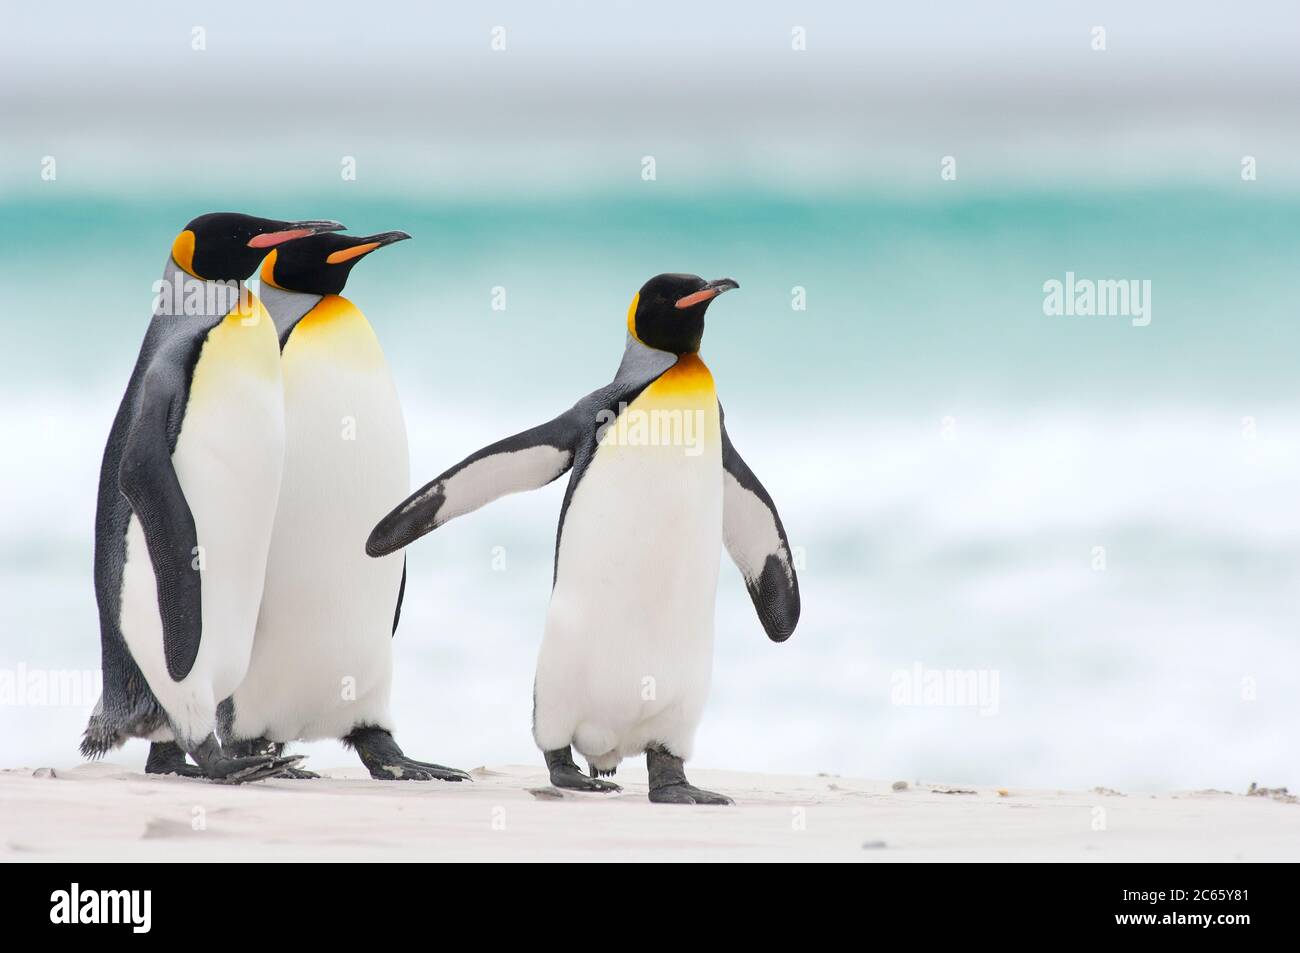 Starting to and returning from their foraging trips the king penguins (Aptenodytes patagonicus) often gather in groups. This habit potentially lowers the risk of being caught by their aquatic predators, e.g. the sea lion and the orca. Stock Photo